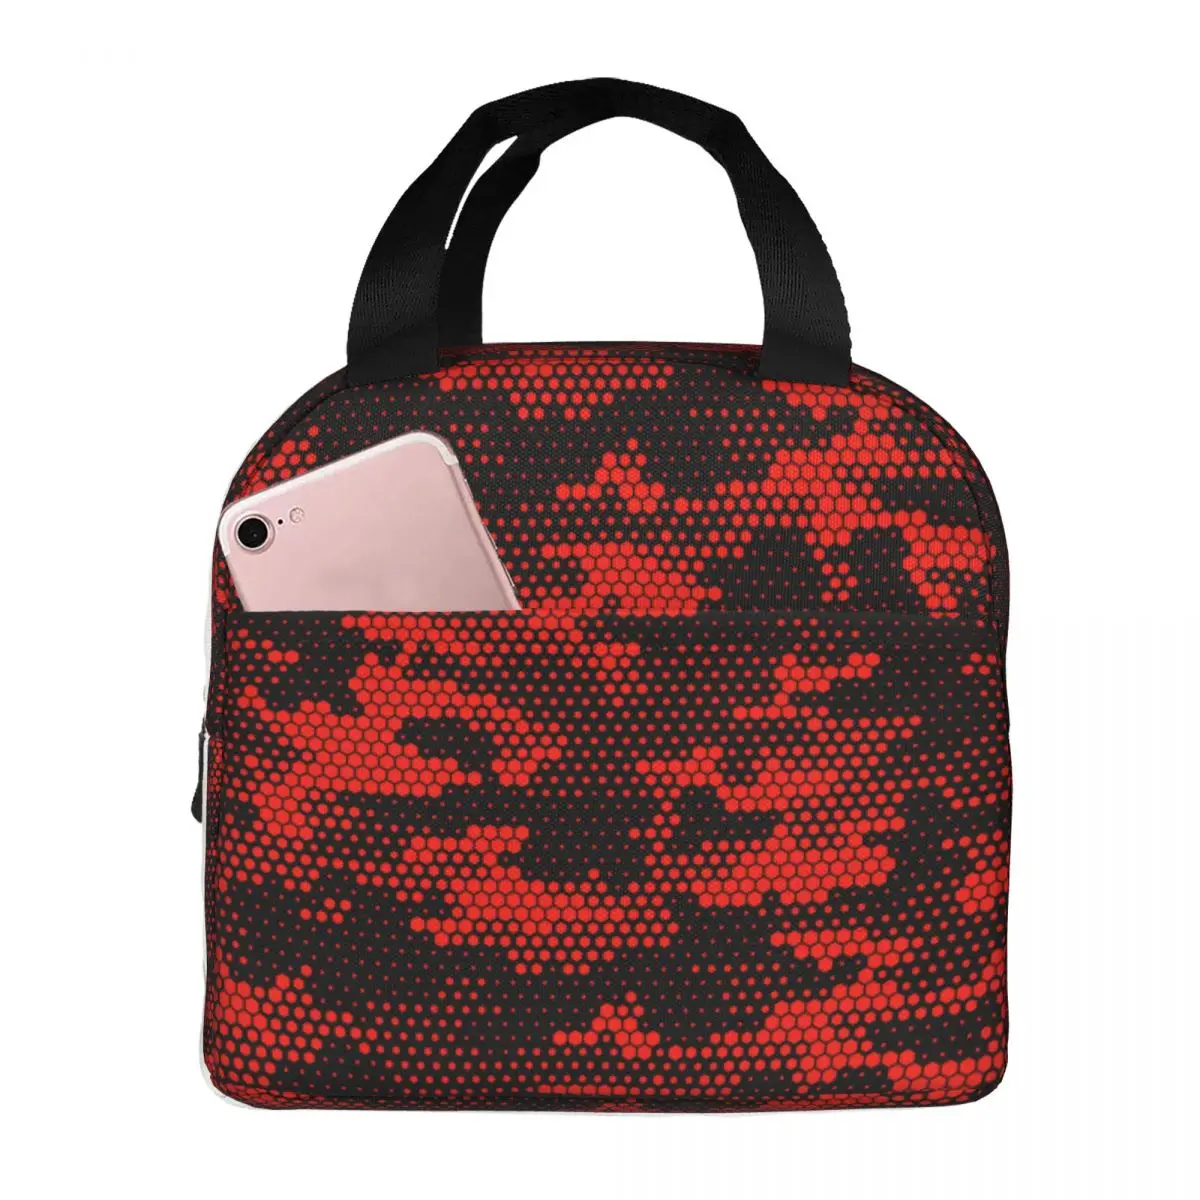 Camouflage Lunch Bags Waterproof Insulated Oxford Cooler Thermal School Lunch Box for Women Children